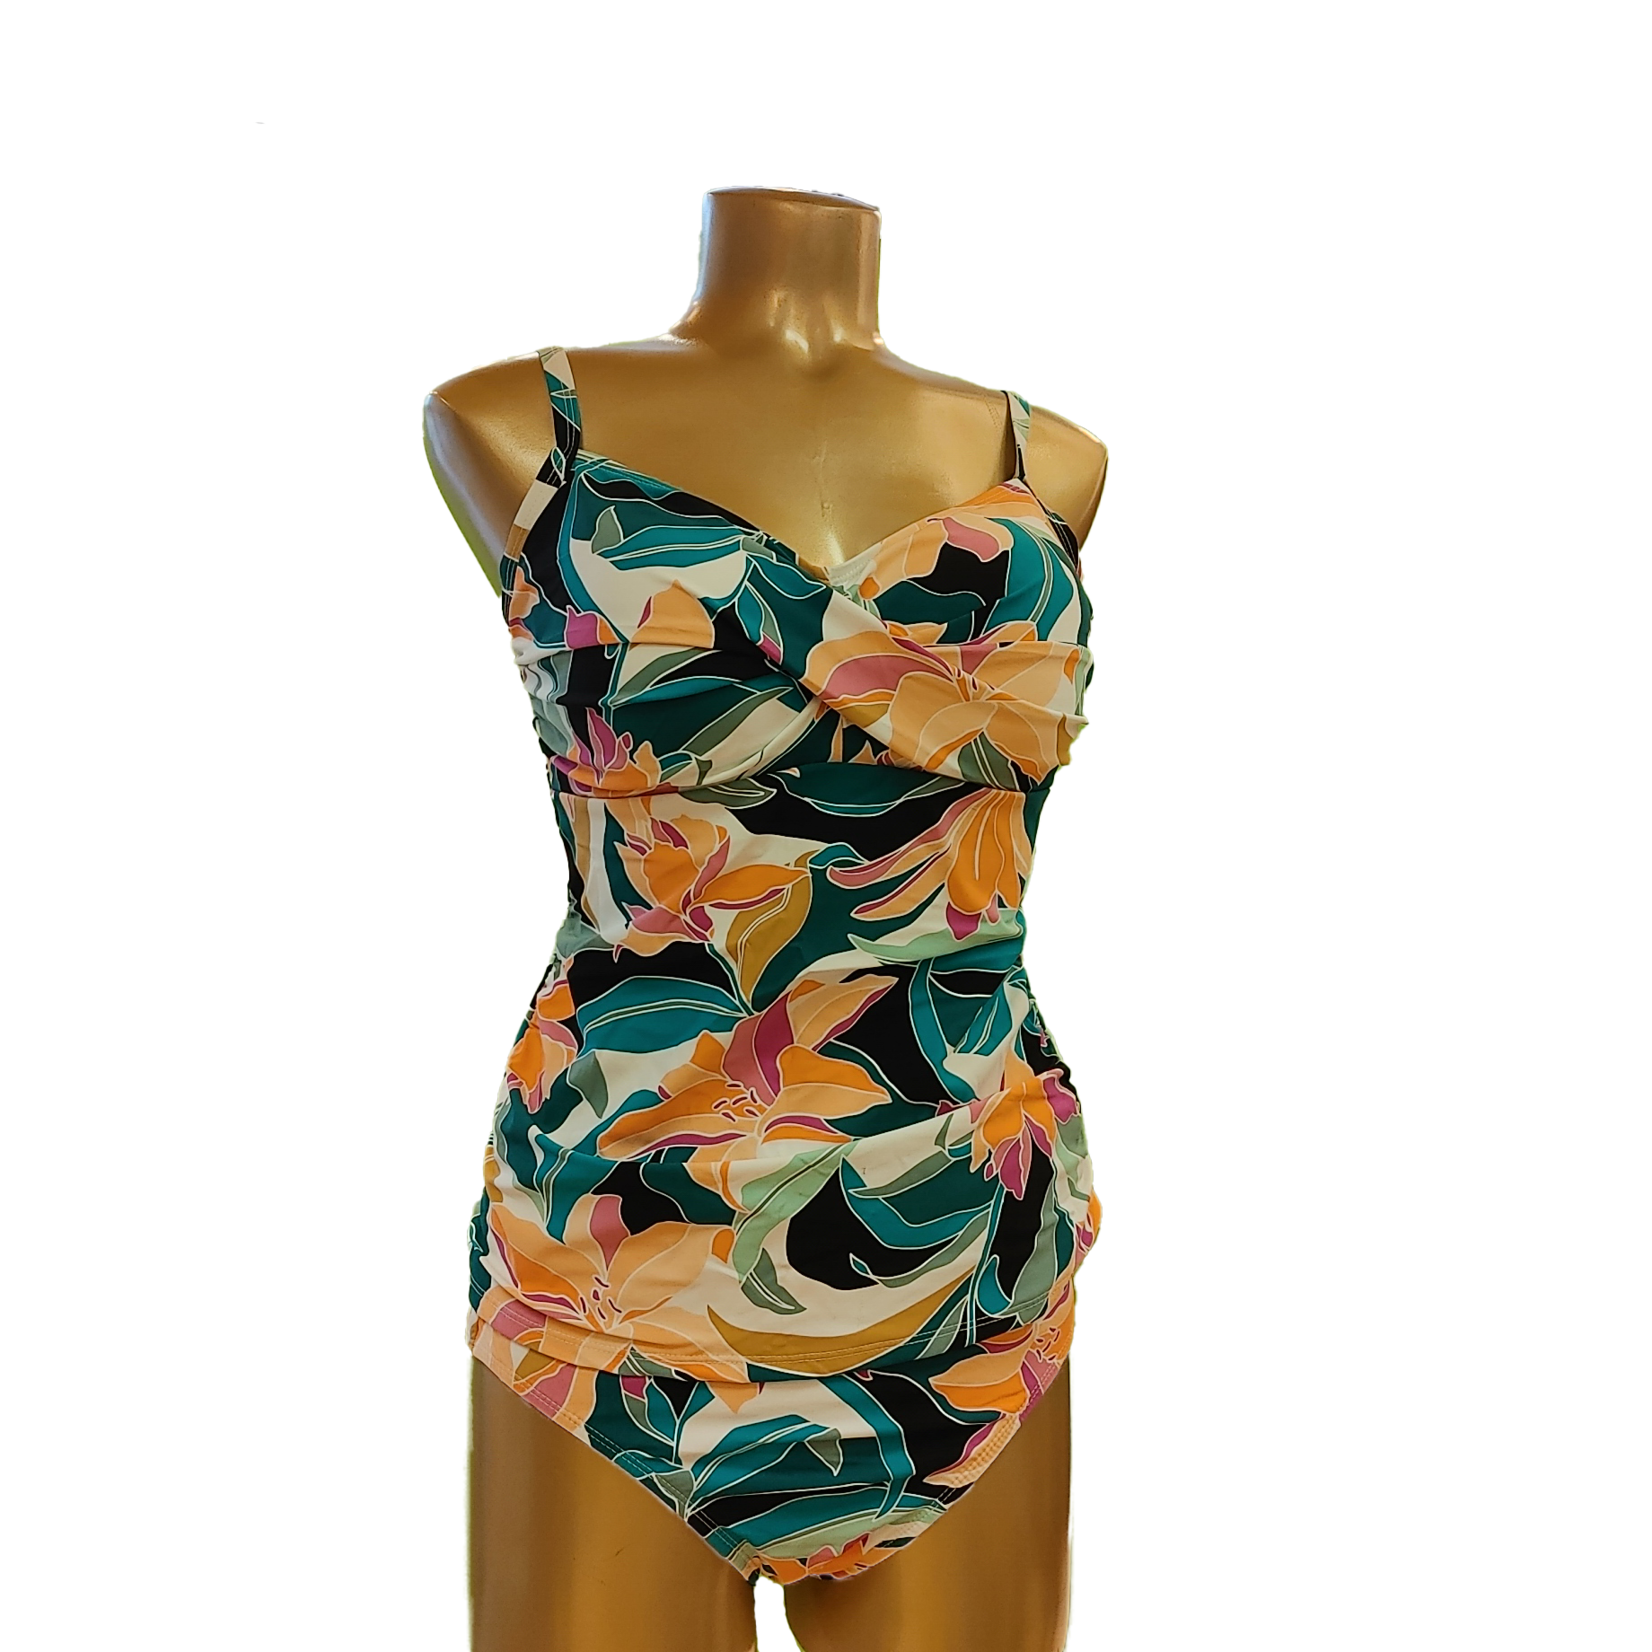 christina Christina floral cami twist tankini with bust support